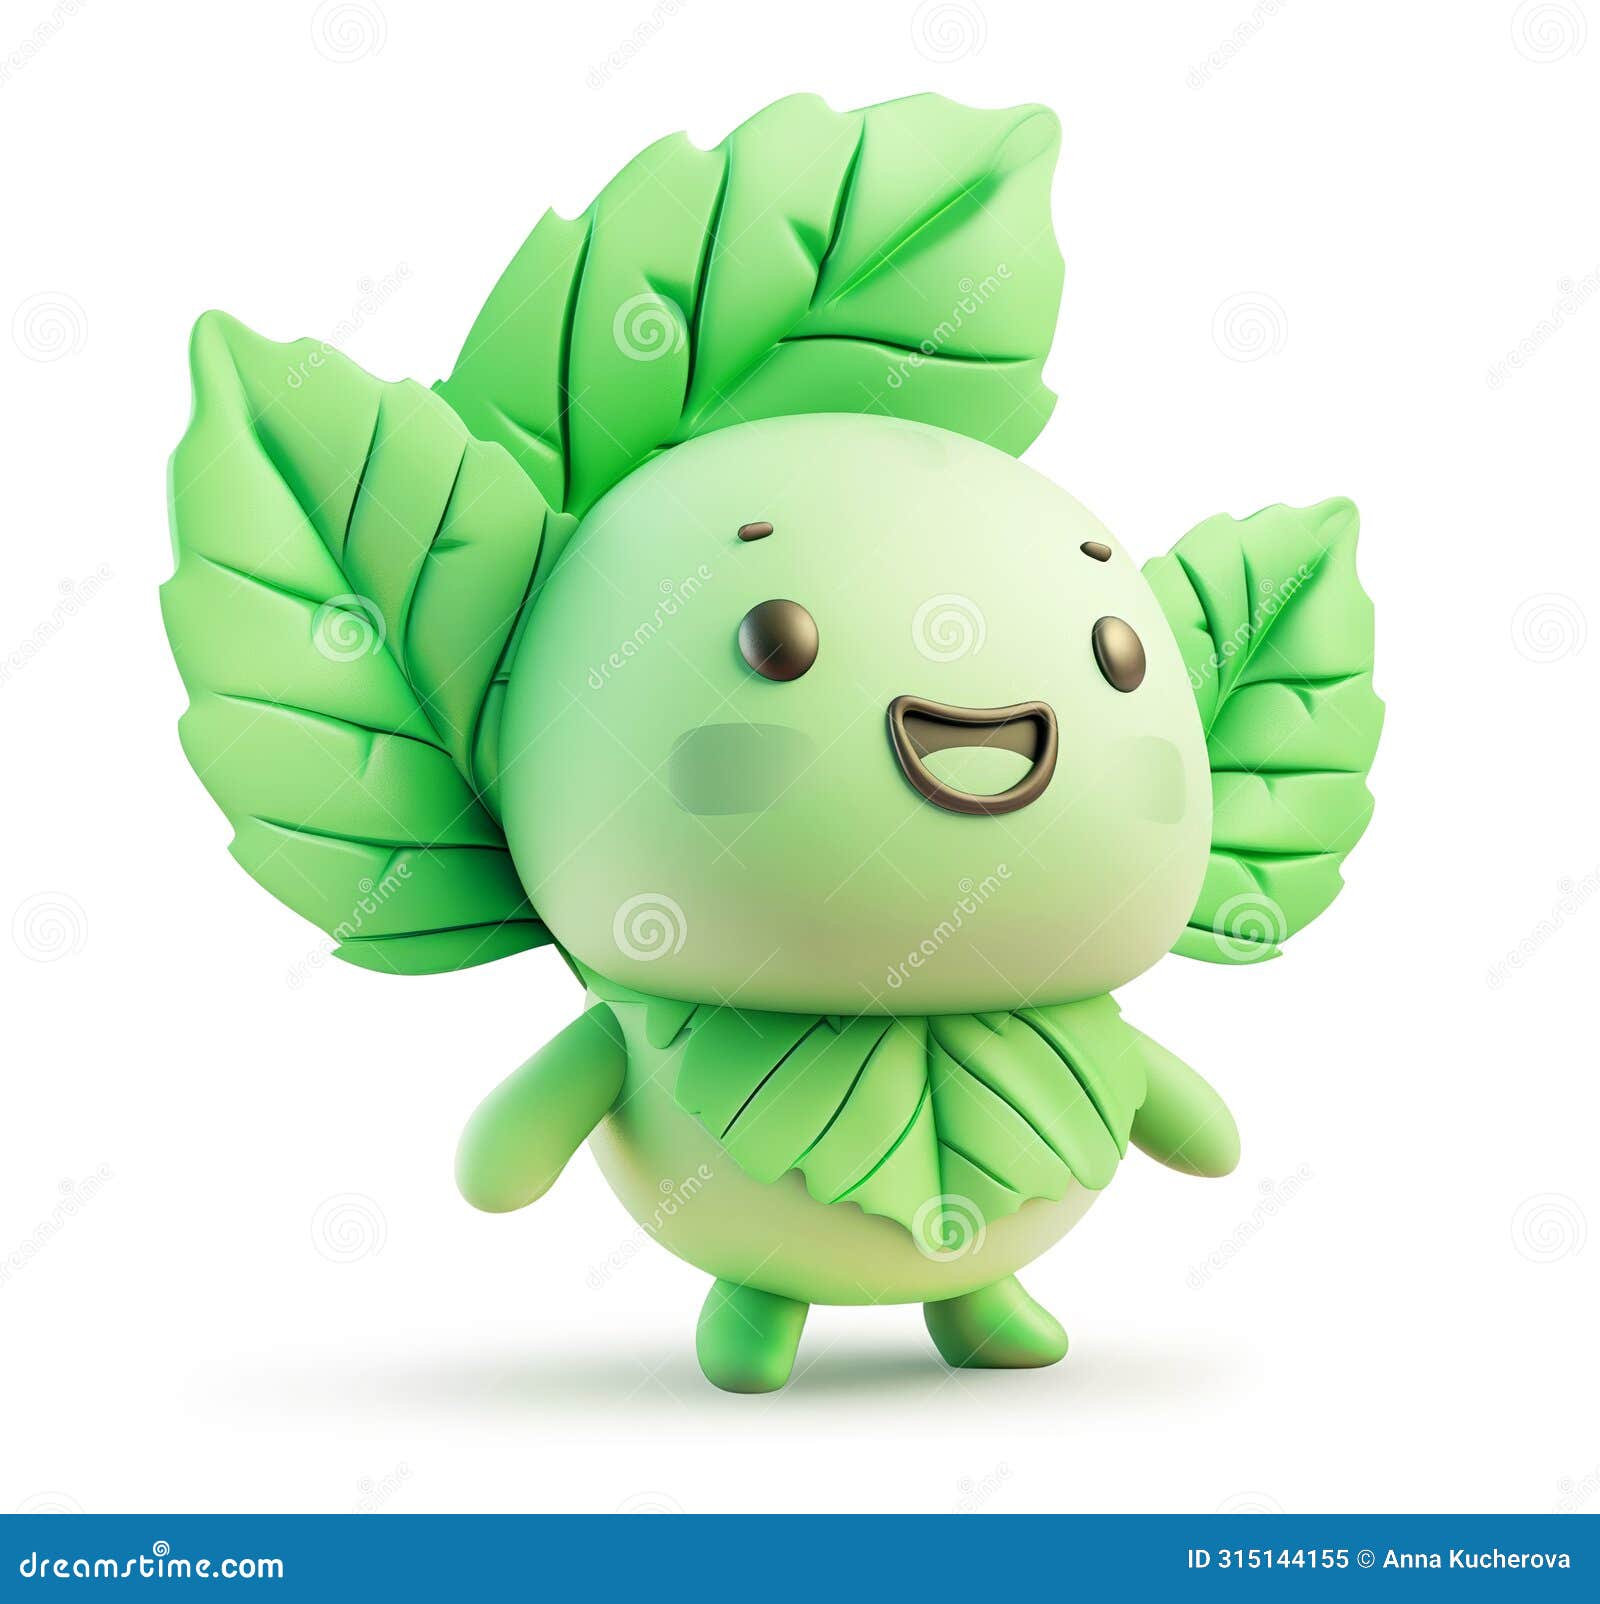 mint leaves character with a joyful expression